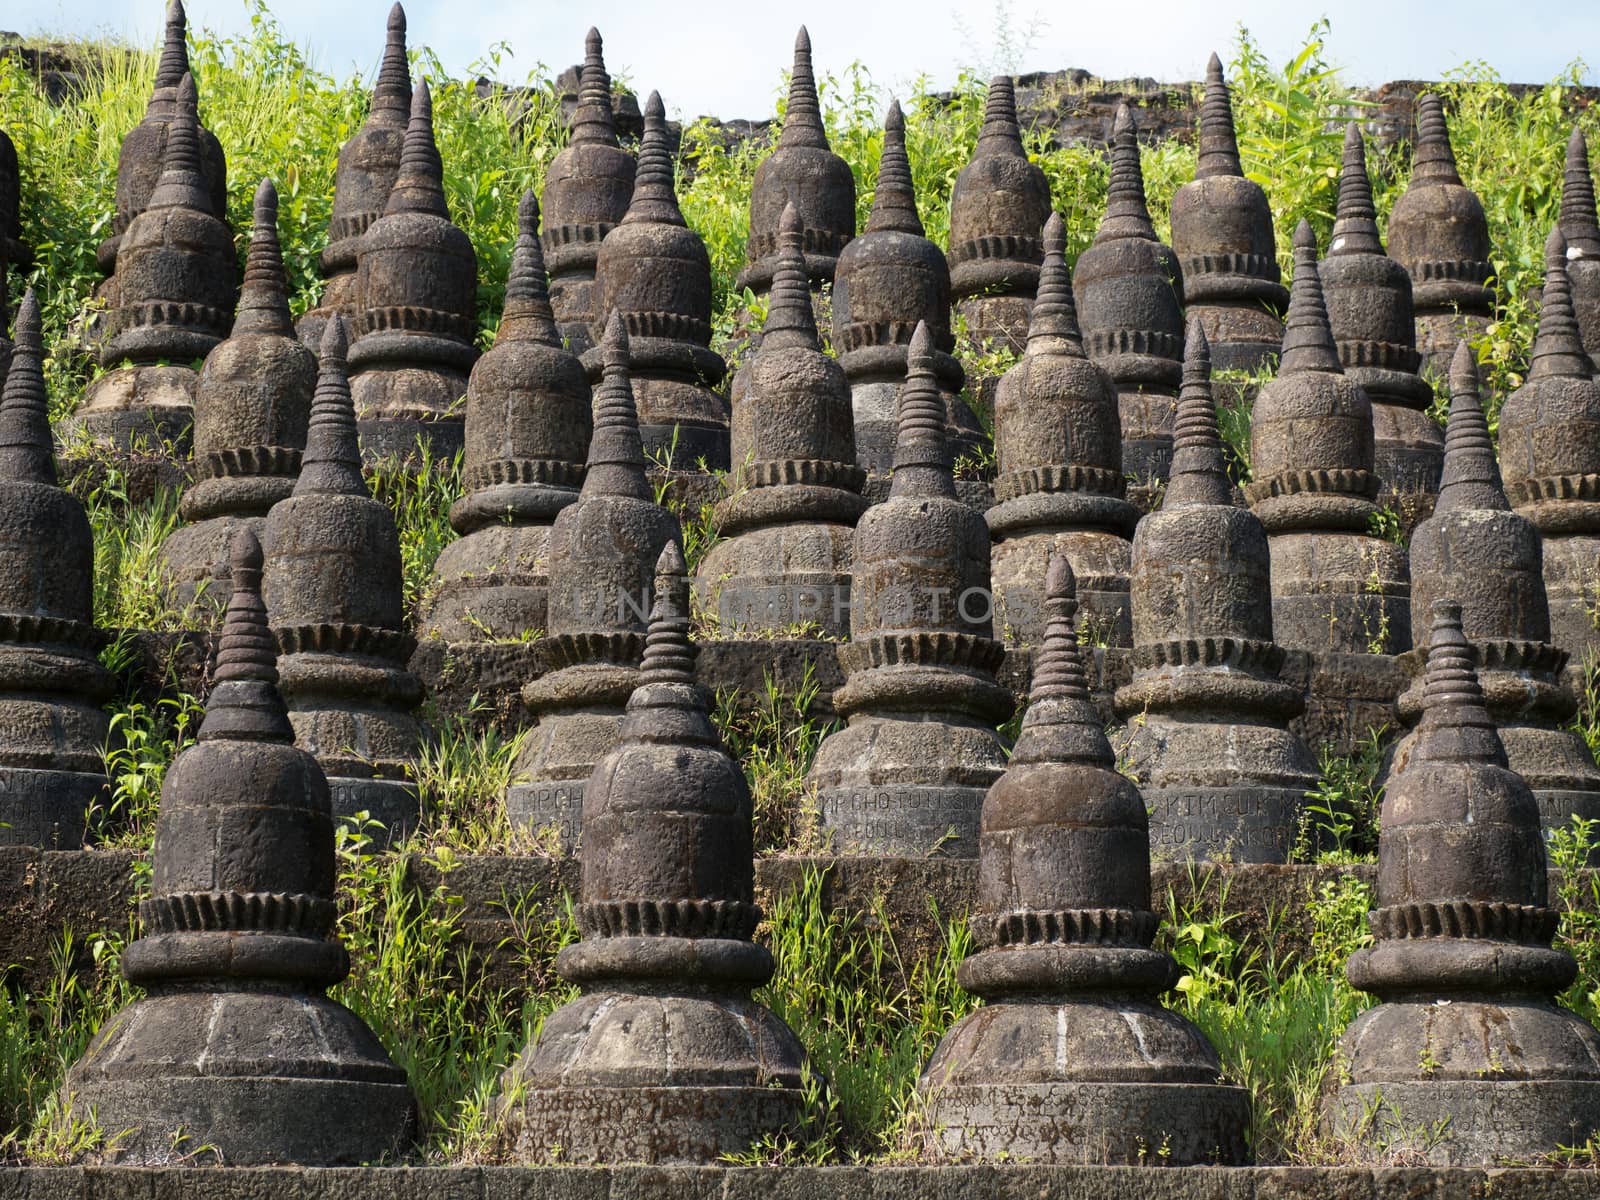 Detail of the Koe-thaung Temple, the temple of the 90,000 Buddhas, built by King Min Dikkha during the years 1554-1556 in Mrauk U, Rakhin State in Myanmar.